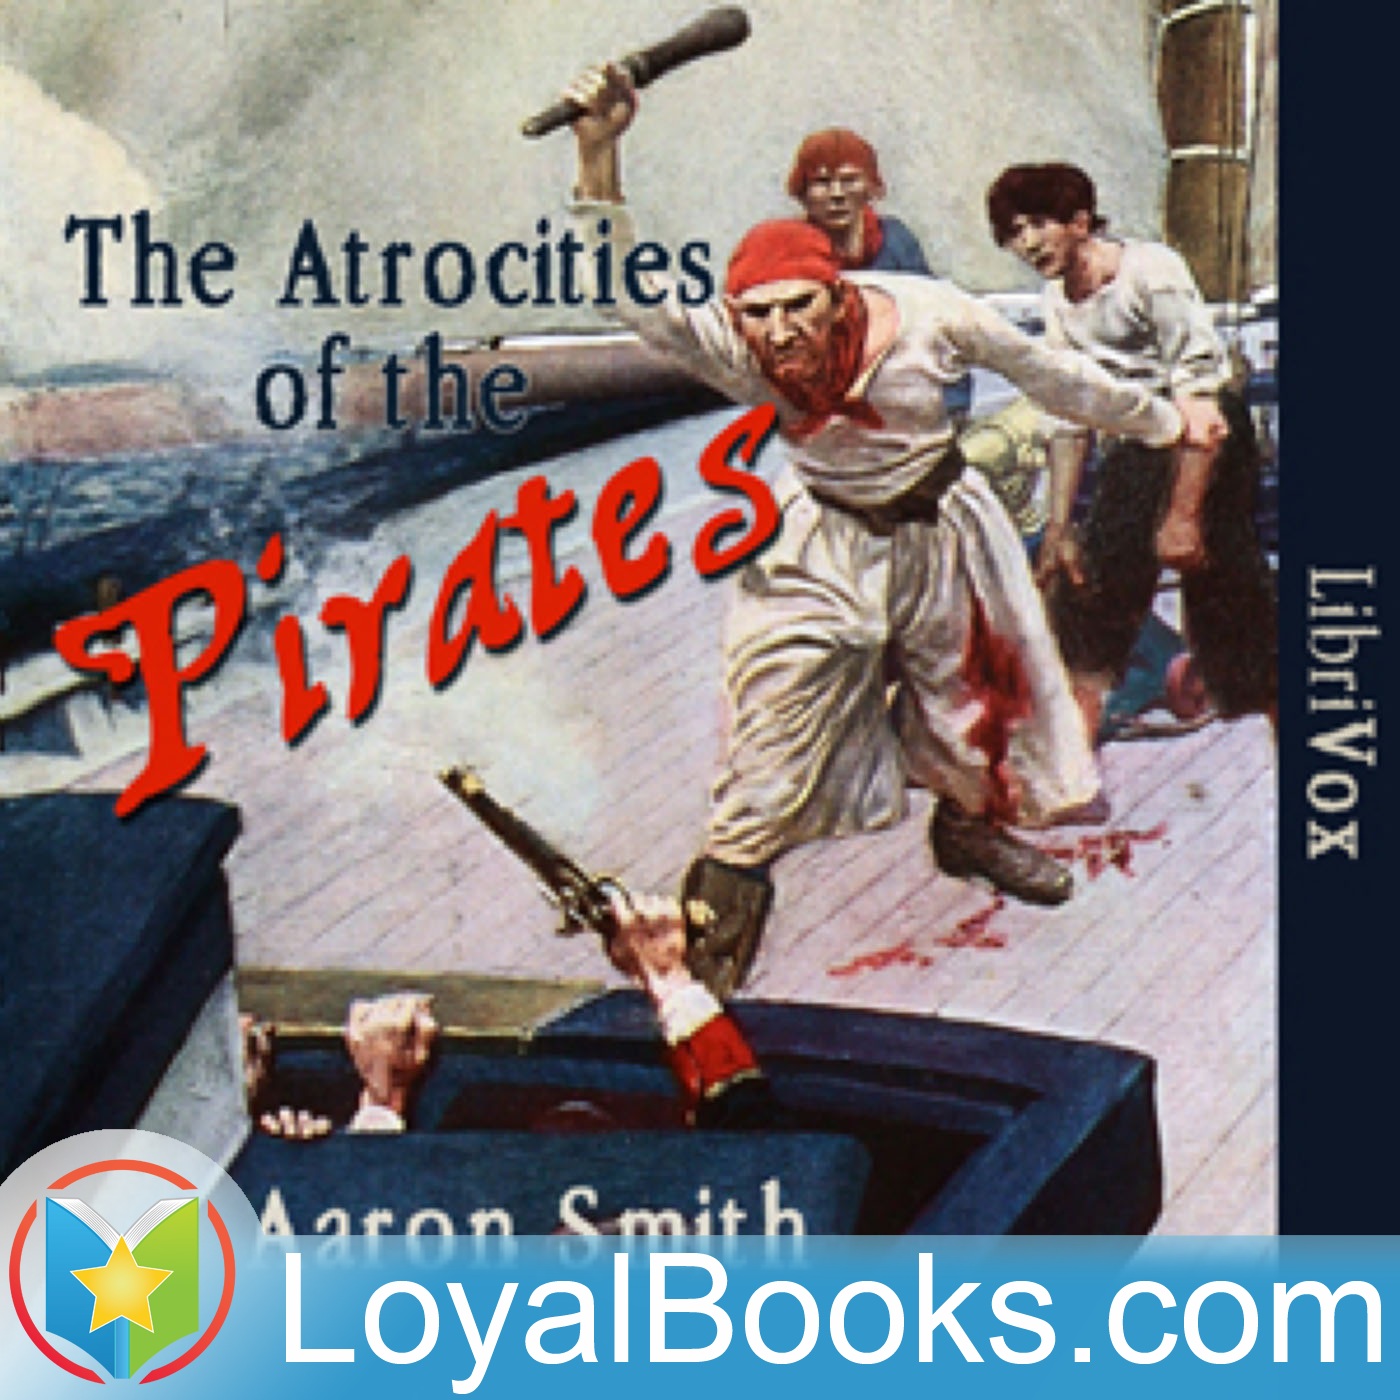 The Atrocities of the Pirates by Aaron Smith